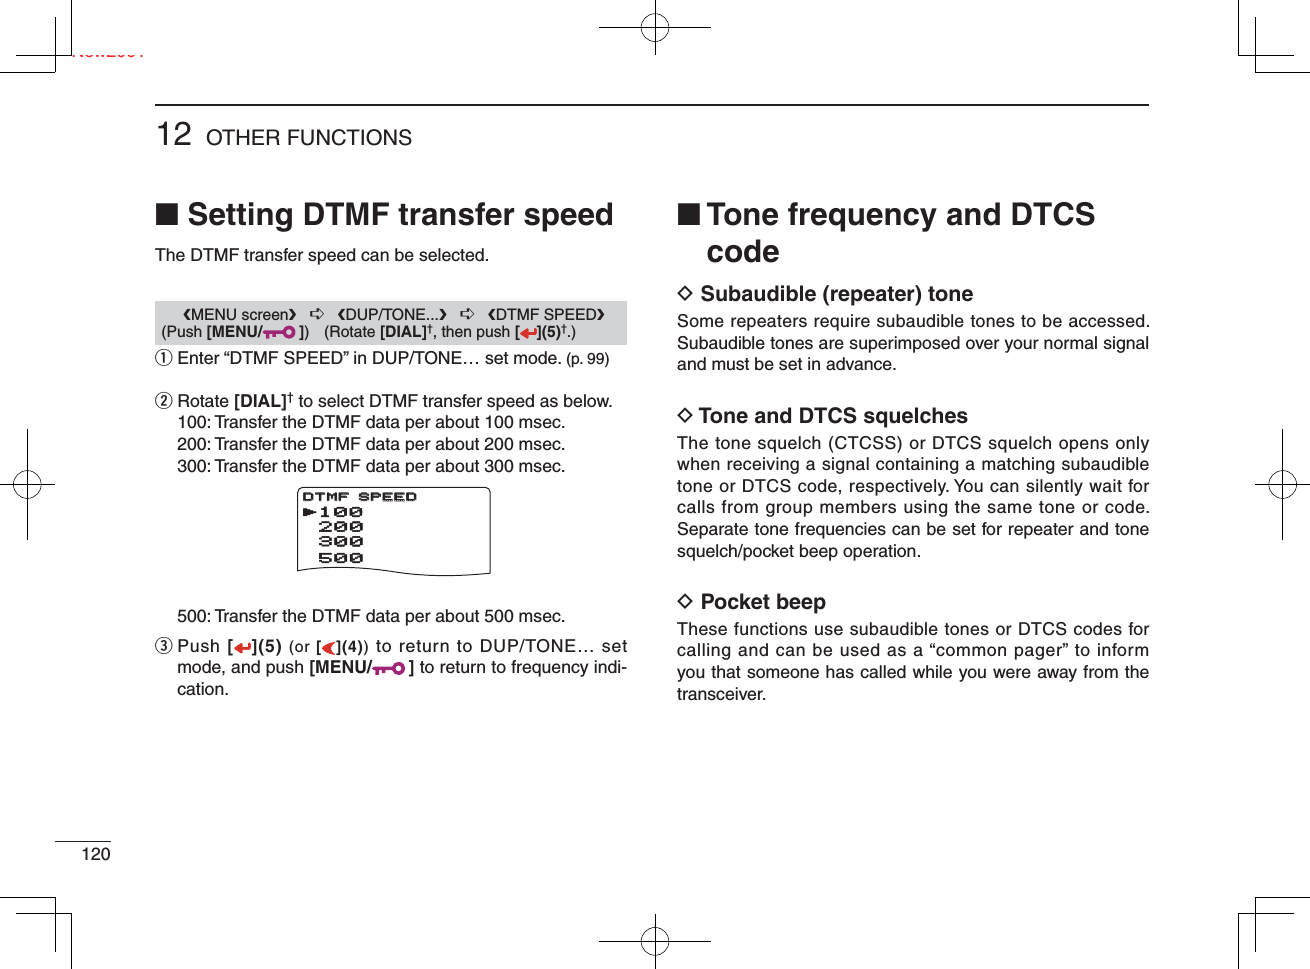 Ne12012 OTHER FUNCTIONSNew2001■ Setting DTMF transfer speedThe DTMF transfer speed can be selected.q  Enter “DTMF SPEED” in DUP/TONE… set mode. (p. 99)w   Rotate [DIAL]† to select DTMF transfer speed as below.  100: Transfer the DTMF data per about 100 msec.  200: Transfer the DTMF data per about 200 msec.  300: Transfer the DTMF data per about 300 msec.  500: Transfer the DTMF data per about 500 msec.e  Push [](5) (or [](4)) to return to DUP/TONE… set mode, and push [MENU/ ] to return to frequency indi-cation.■  Tone frequency and DTCS codeD  Subaudible (repeater) toneSome repeaters require subaudible tones to be accessed. Subaudible tones are superimposed over your normal signal and must be set in advance.D  Tone and DTCS squelchesThe tone squelch (CTCSS) or DTCS squelch opens only when receiving a signal containing a matching subaudible tone or DTCS code, respectively. You can silently wait for calls from group members using the same tone or code. Separate tone frequencies can be set for repeater and tone squelch/pocket beep operation.D  Pocket beepThese functions use subaudible tones or DTCS codes for calling and can be used as a “common pager” to inform you that someone has called while you were away from the transceiver.       ❮MENU screen❯   ➪   ❮DUP/TONE...❯   ➪   ❮DTMF SPEED❯ (Push [MENU/ ]) (Rotate [DIAL]†, then push [ ](5)†.)   DV SET MODE   SCANrDUP/TONE...***** MENU *****r100      200      500      300DTMF SPEEDDTMF SPEED